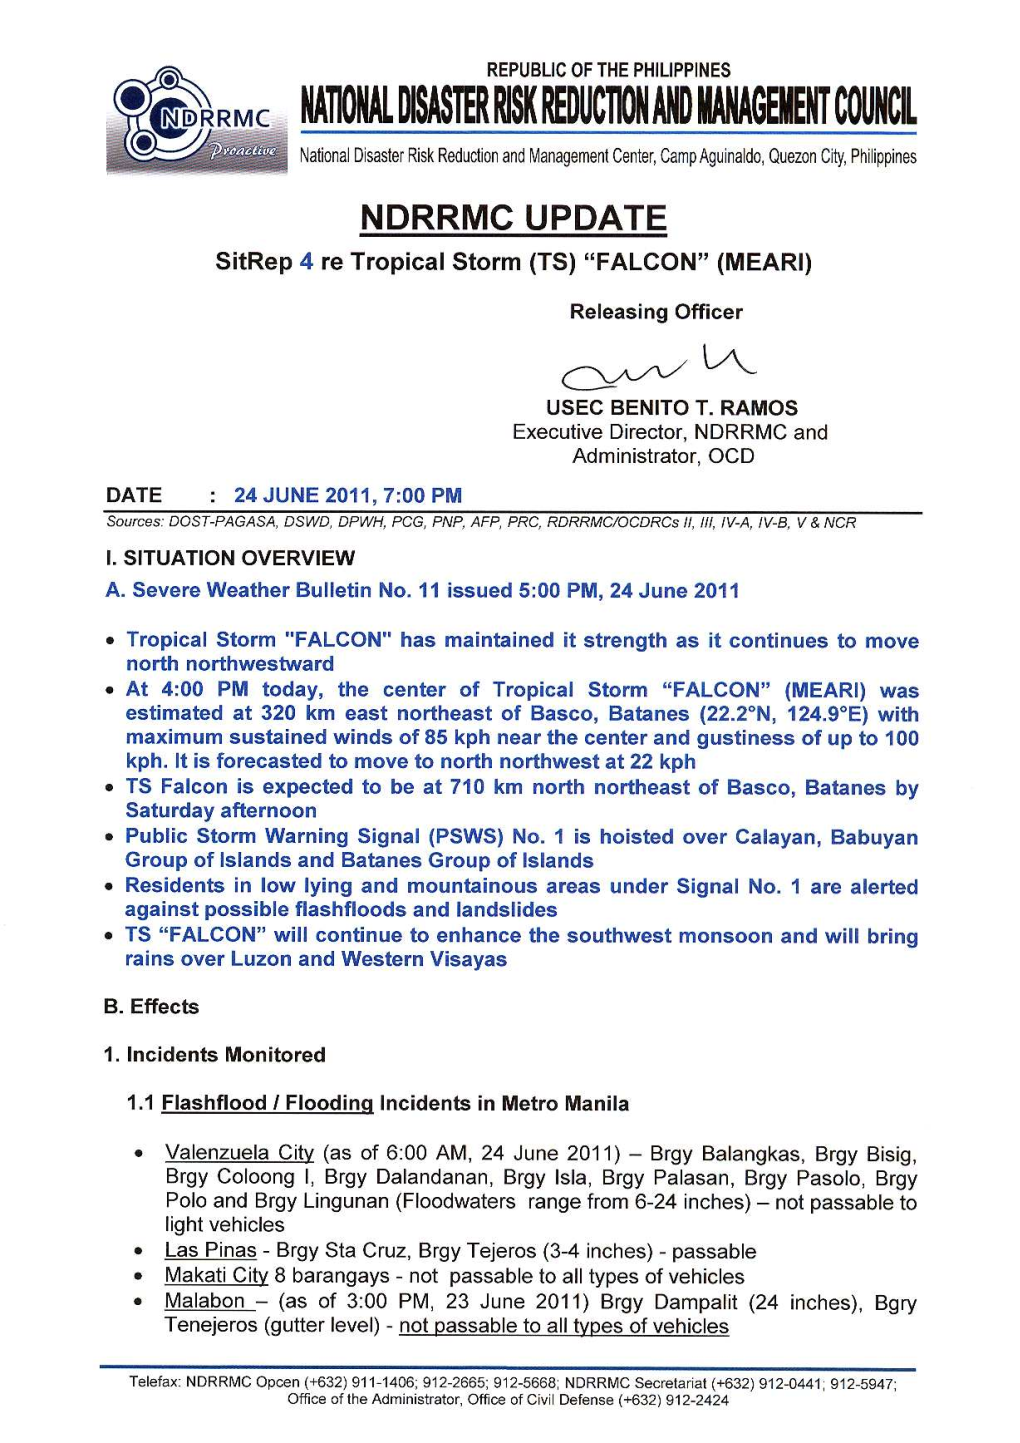 NDRRMC Update for SITREP 4 Re TS Falcon 24 June 2011